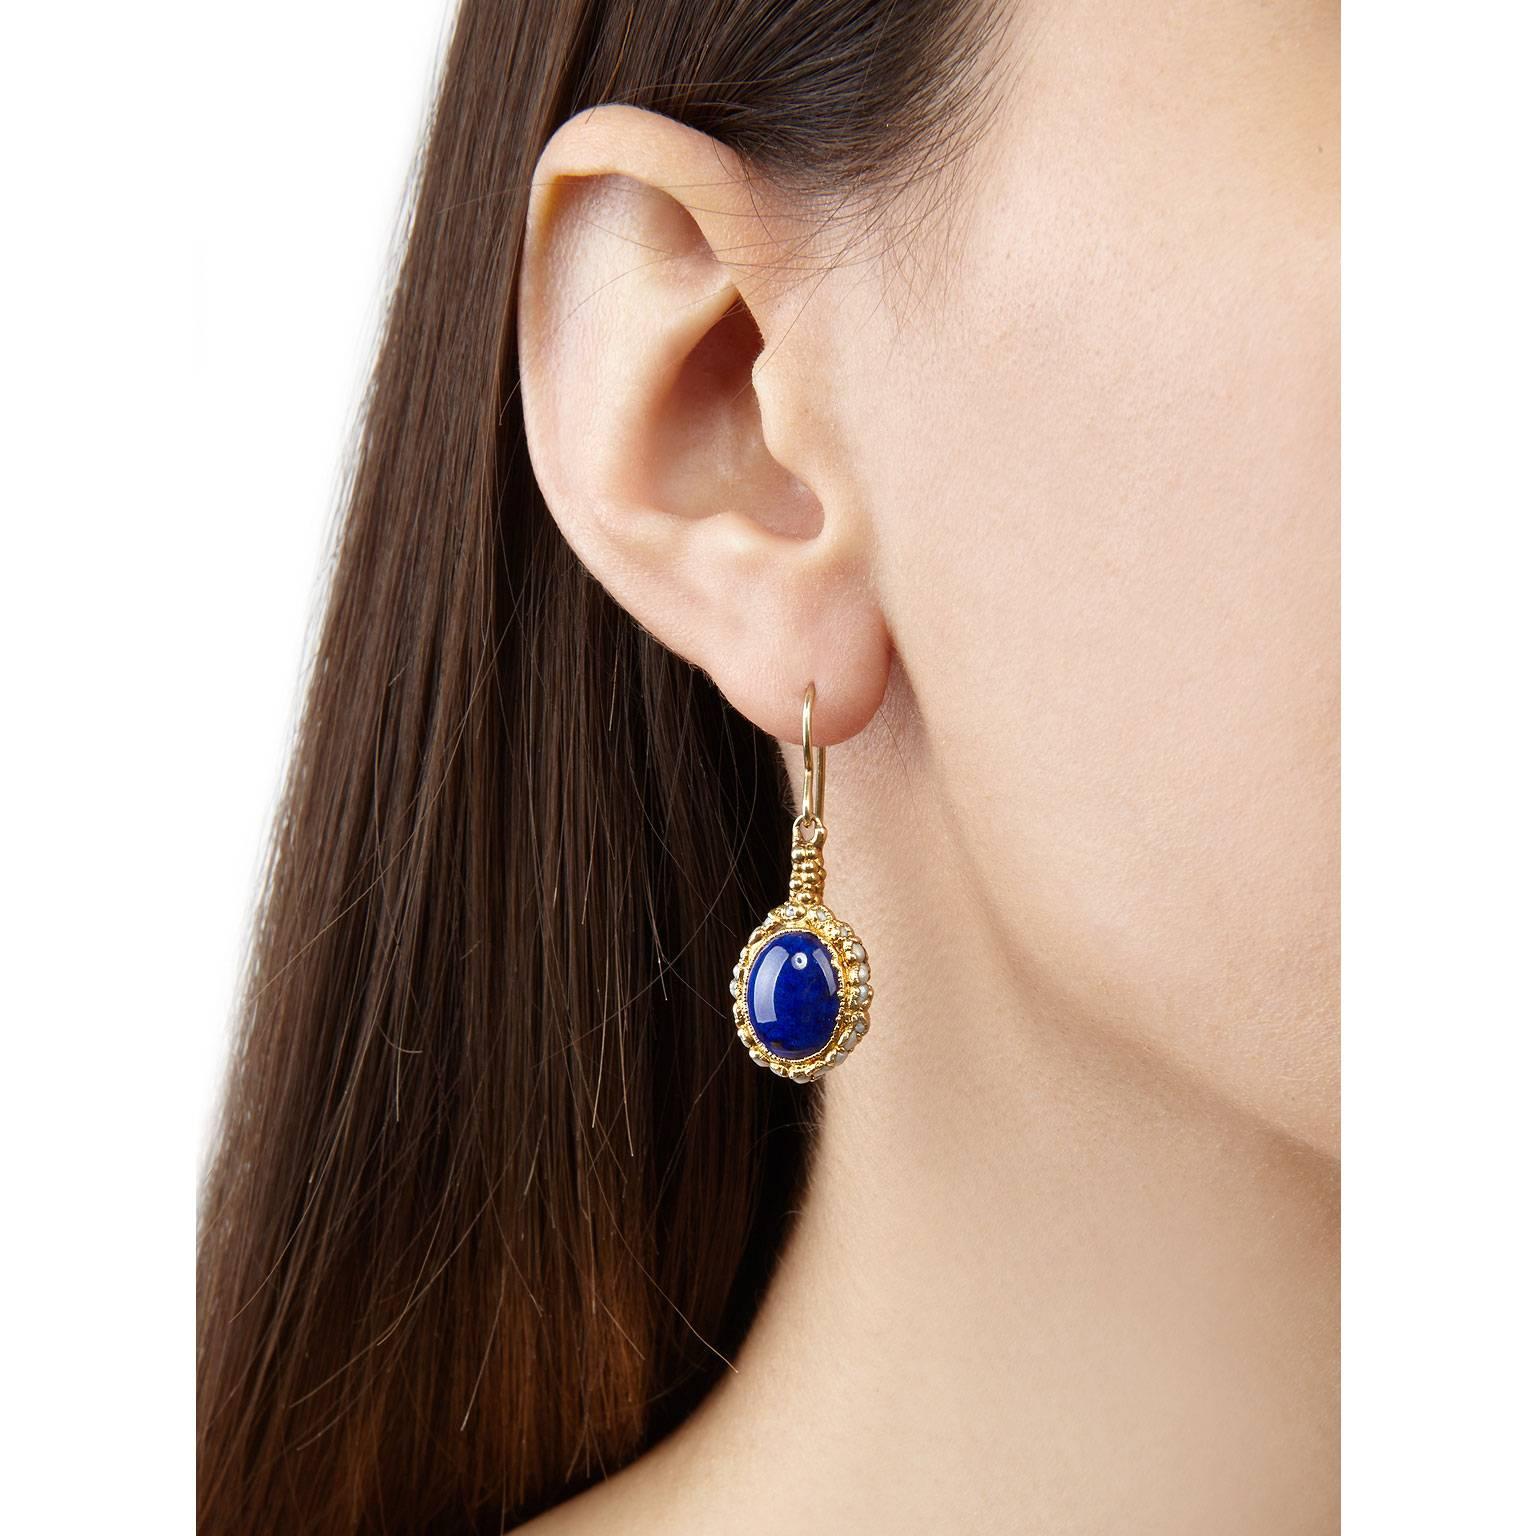 Add a little opulence to your everyday look with these understated Mary Rose earrings. Featuring midnight-blue lapis lazuli stones at their centre and surrounded by a halo of seed pearls. They are encrusted in granules of gold plated silver.